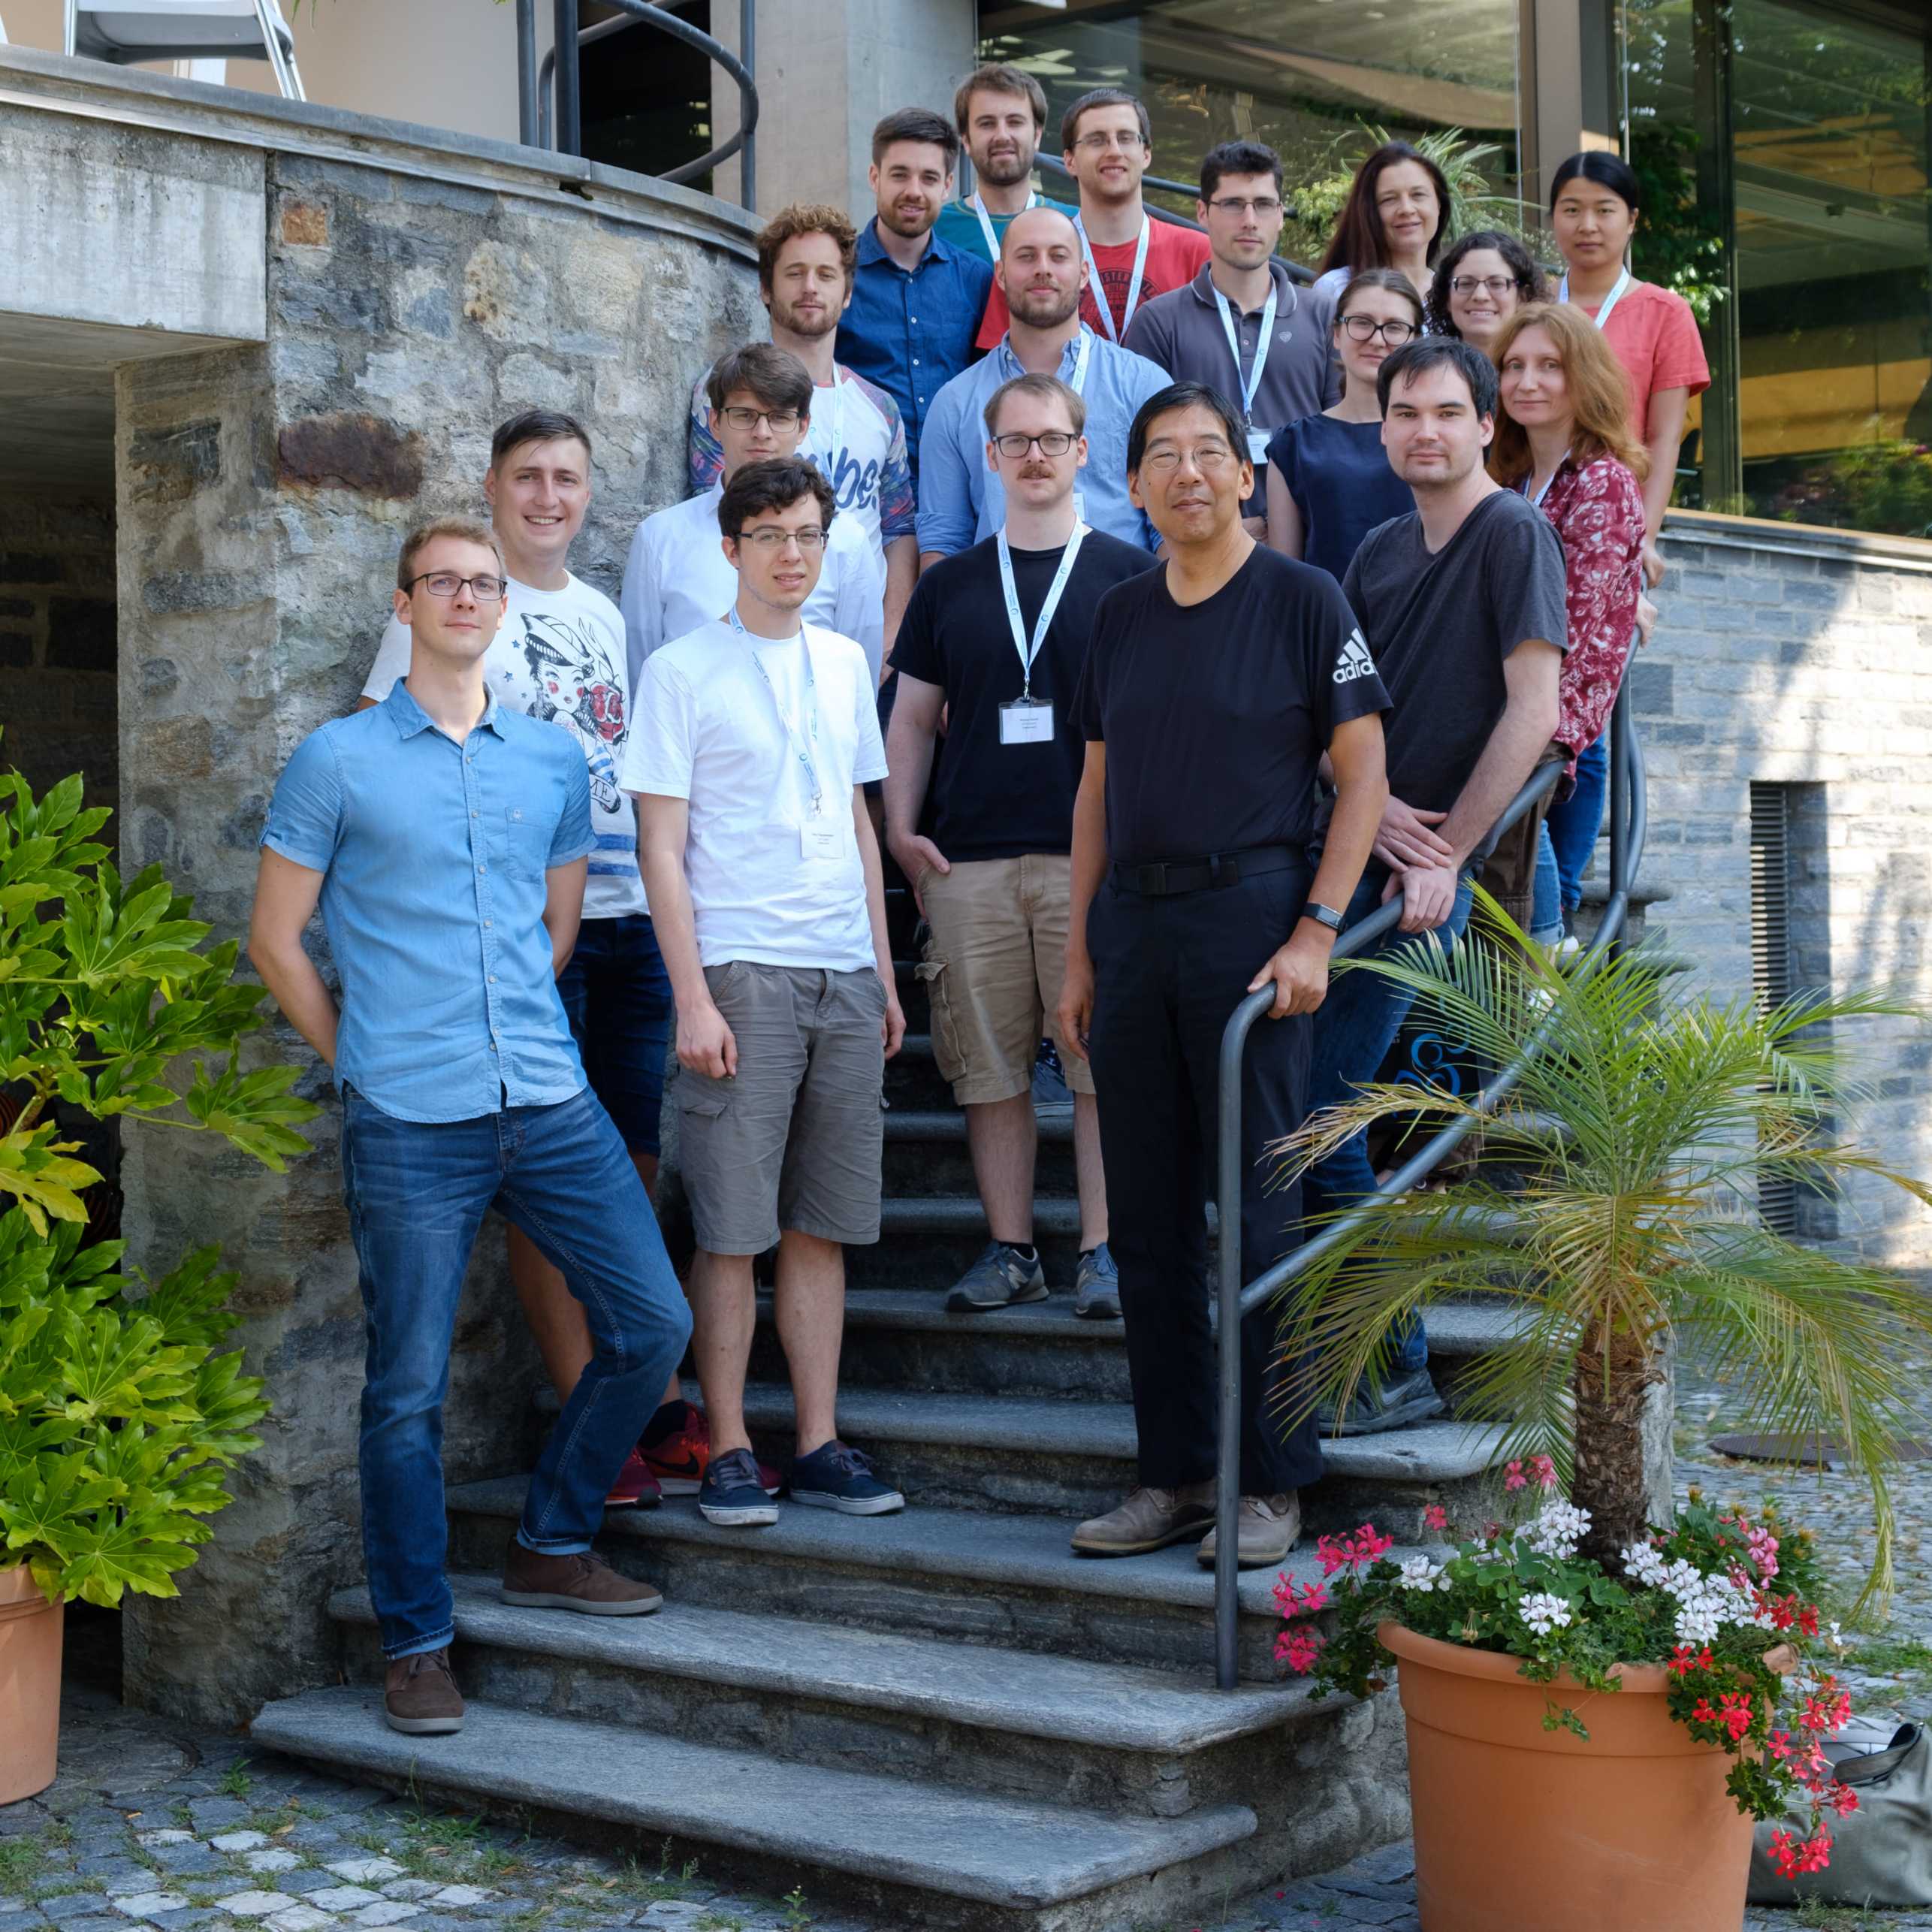 Chen group at ISRIUM conference 2018 in Ascona